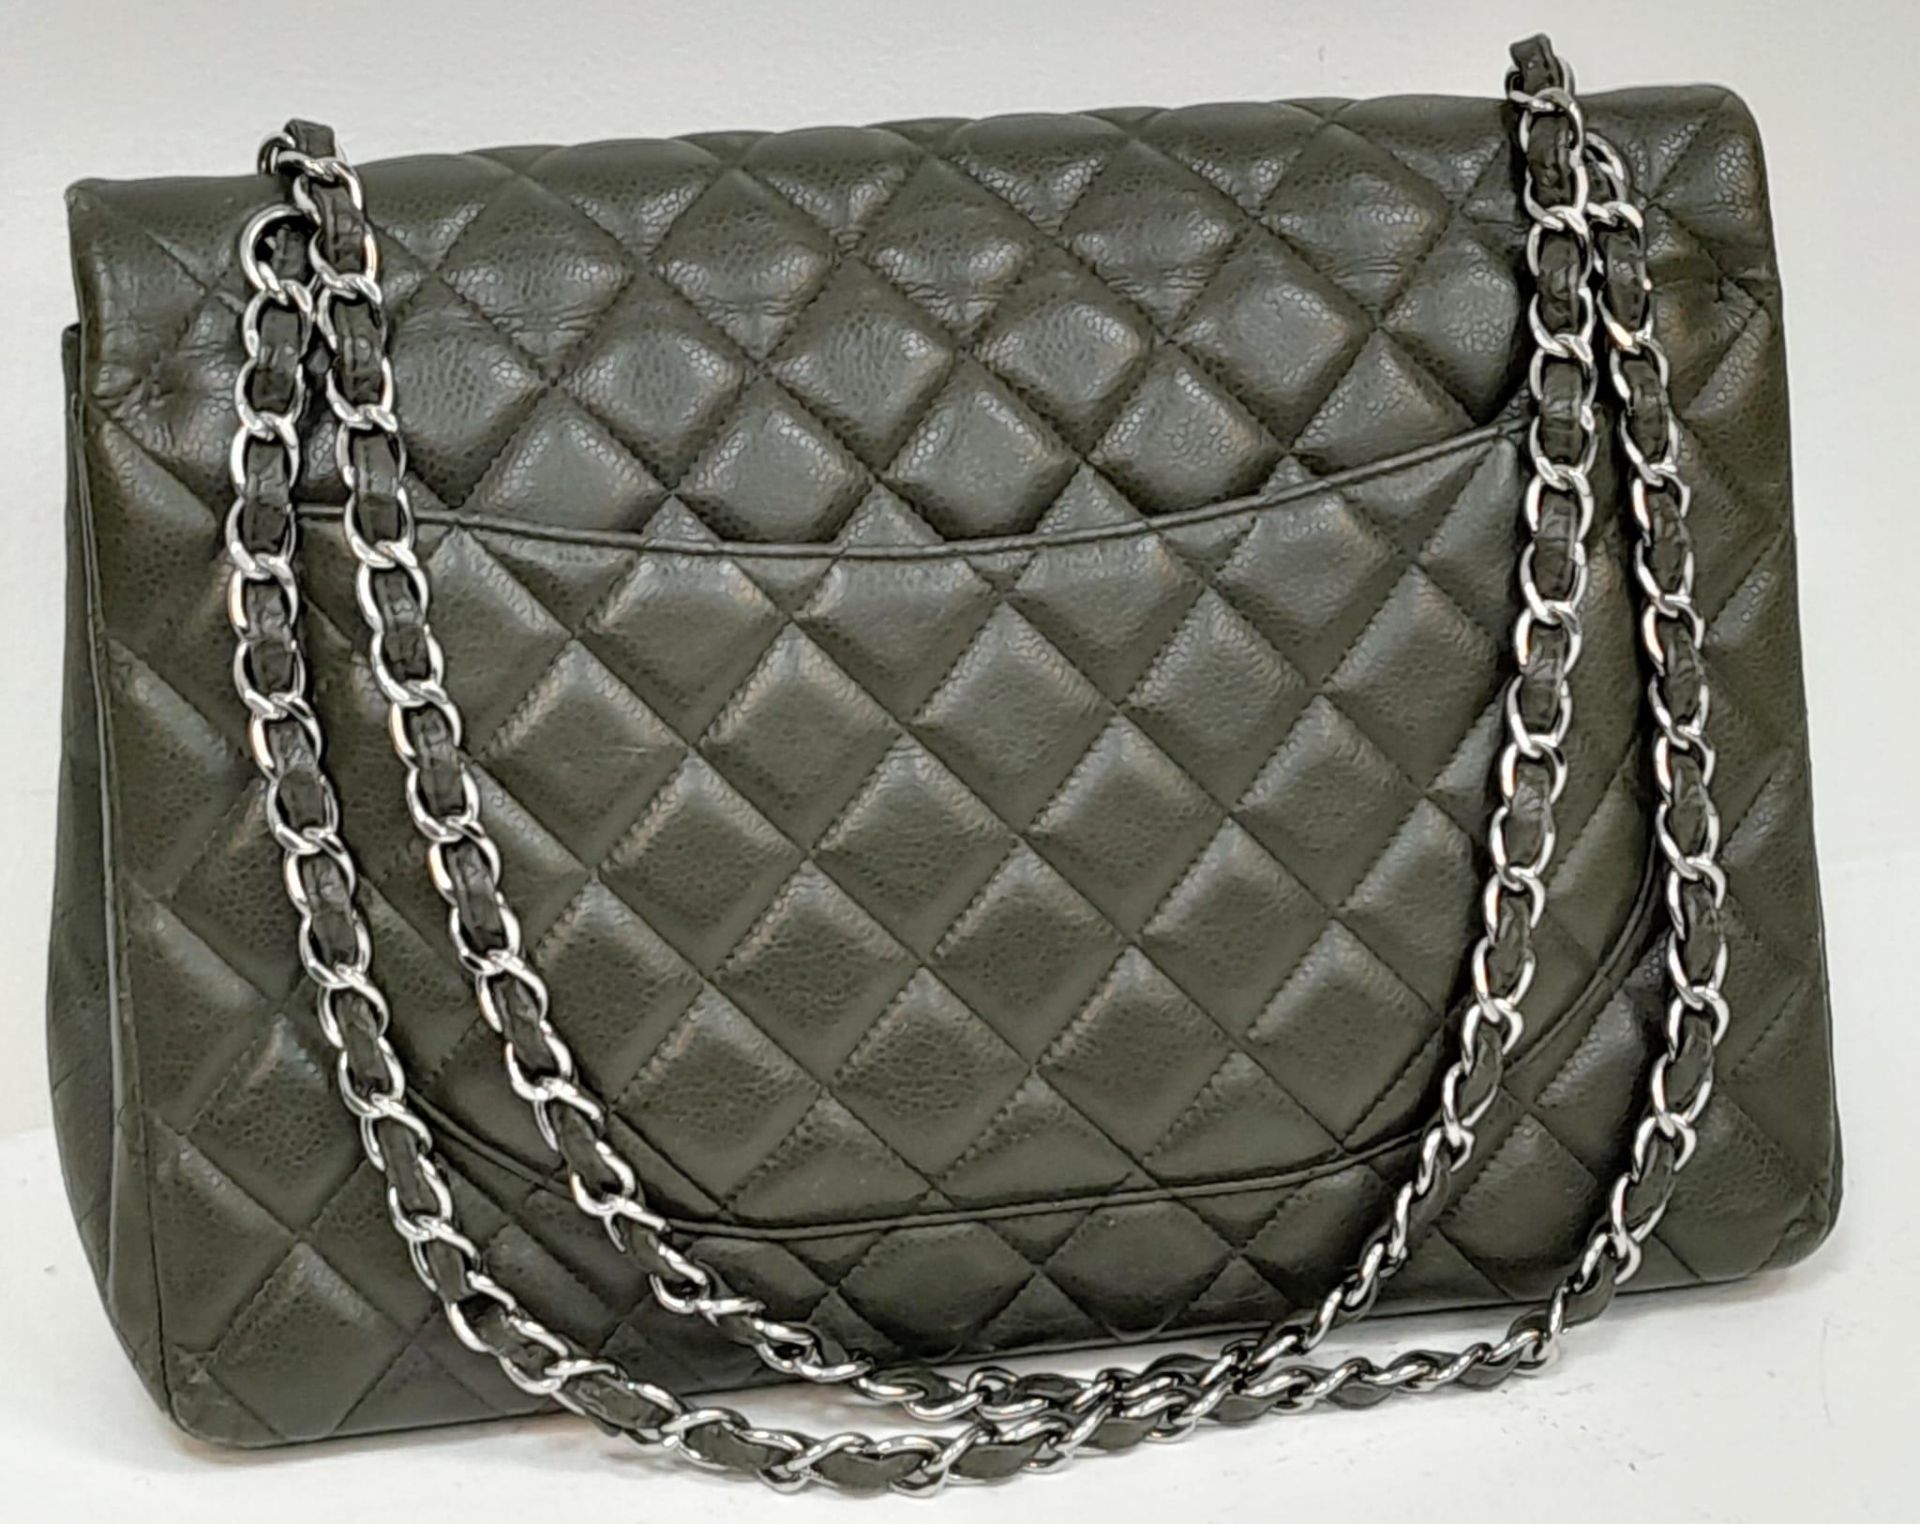 A Chanel Green Jumbo Classic Double Flap Bag. Quilted leather exterior with silver-toned hardware, - Bild 4 aus 14